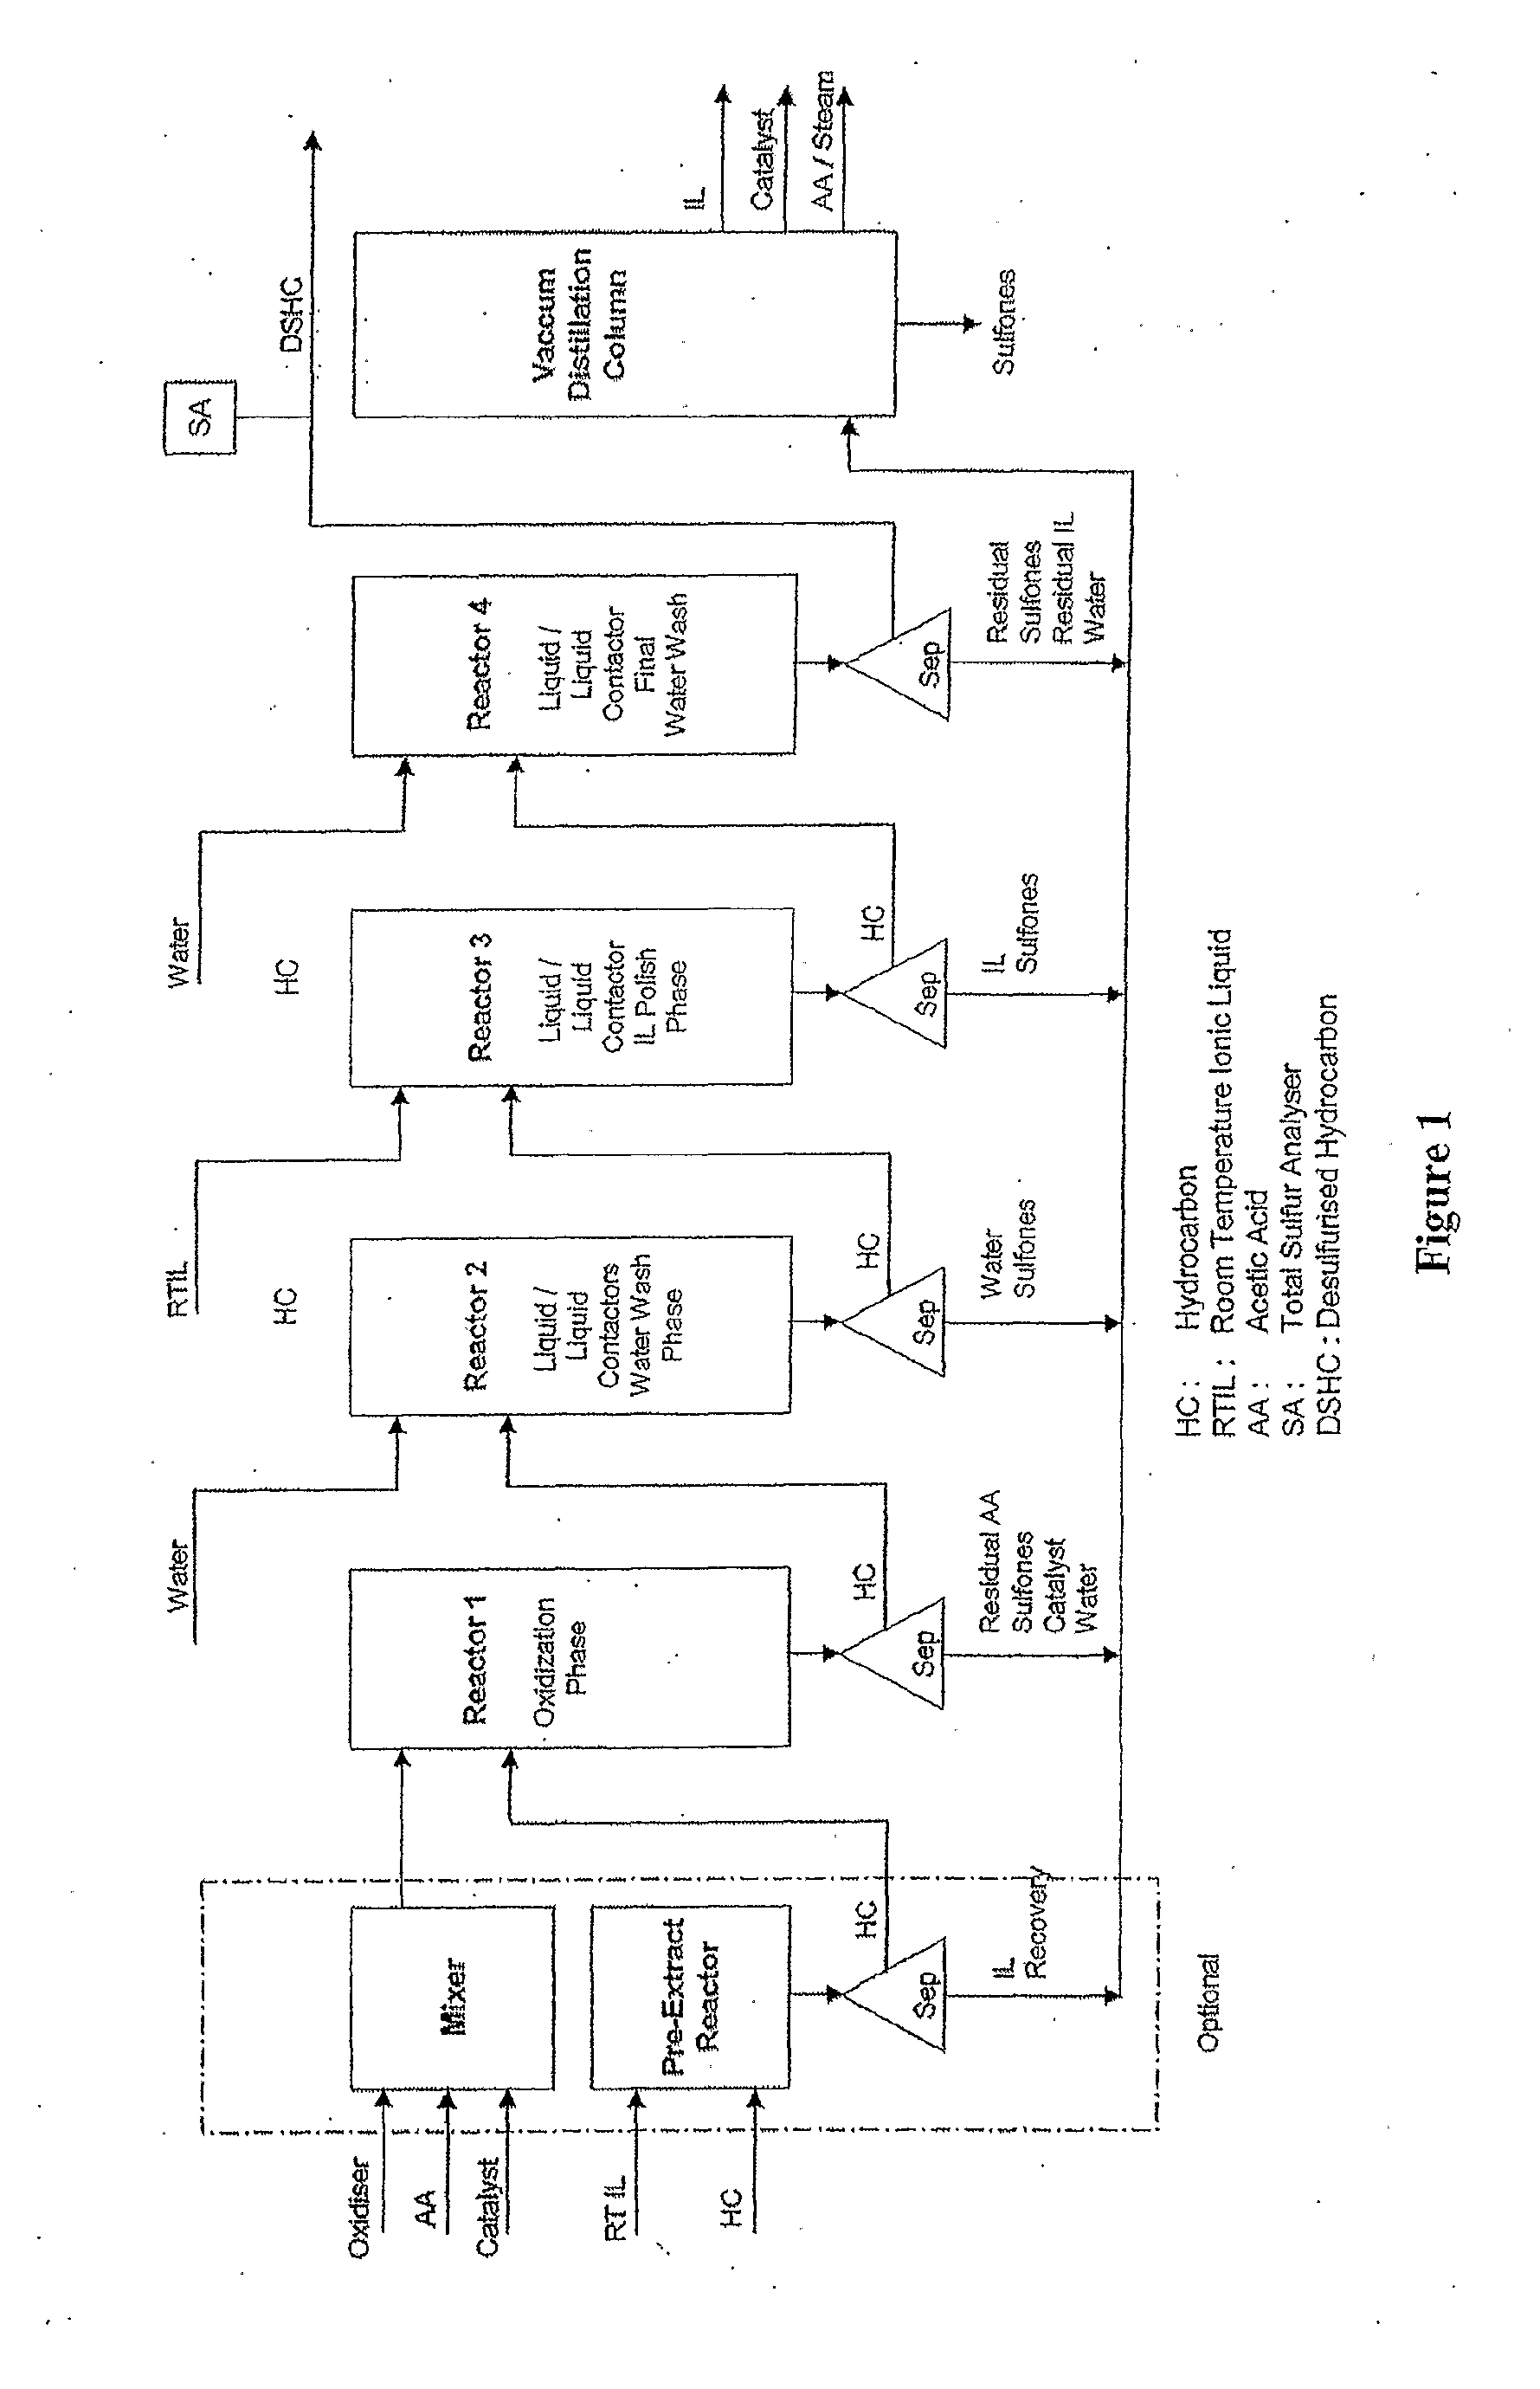 Process for Removing Sulphur From Liquid Hydrocarbons